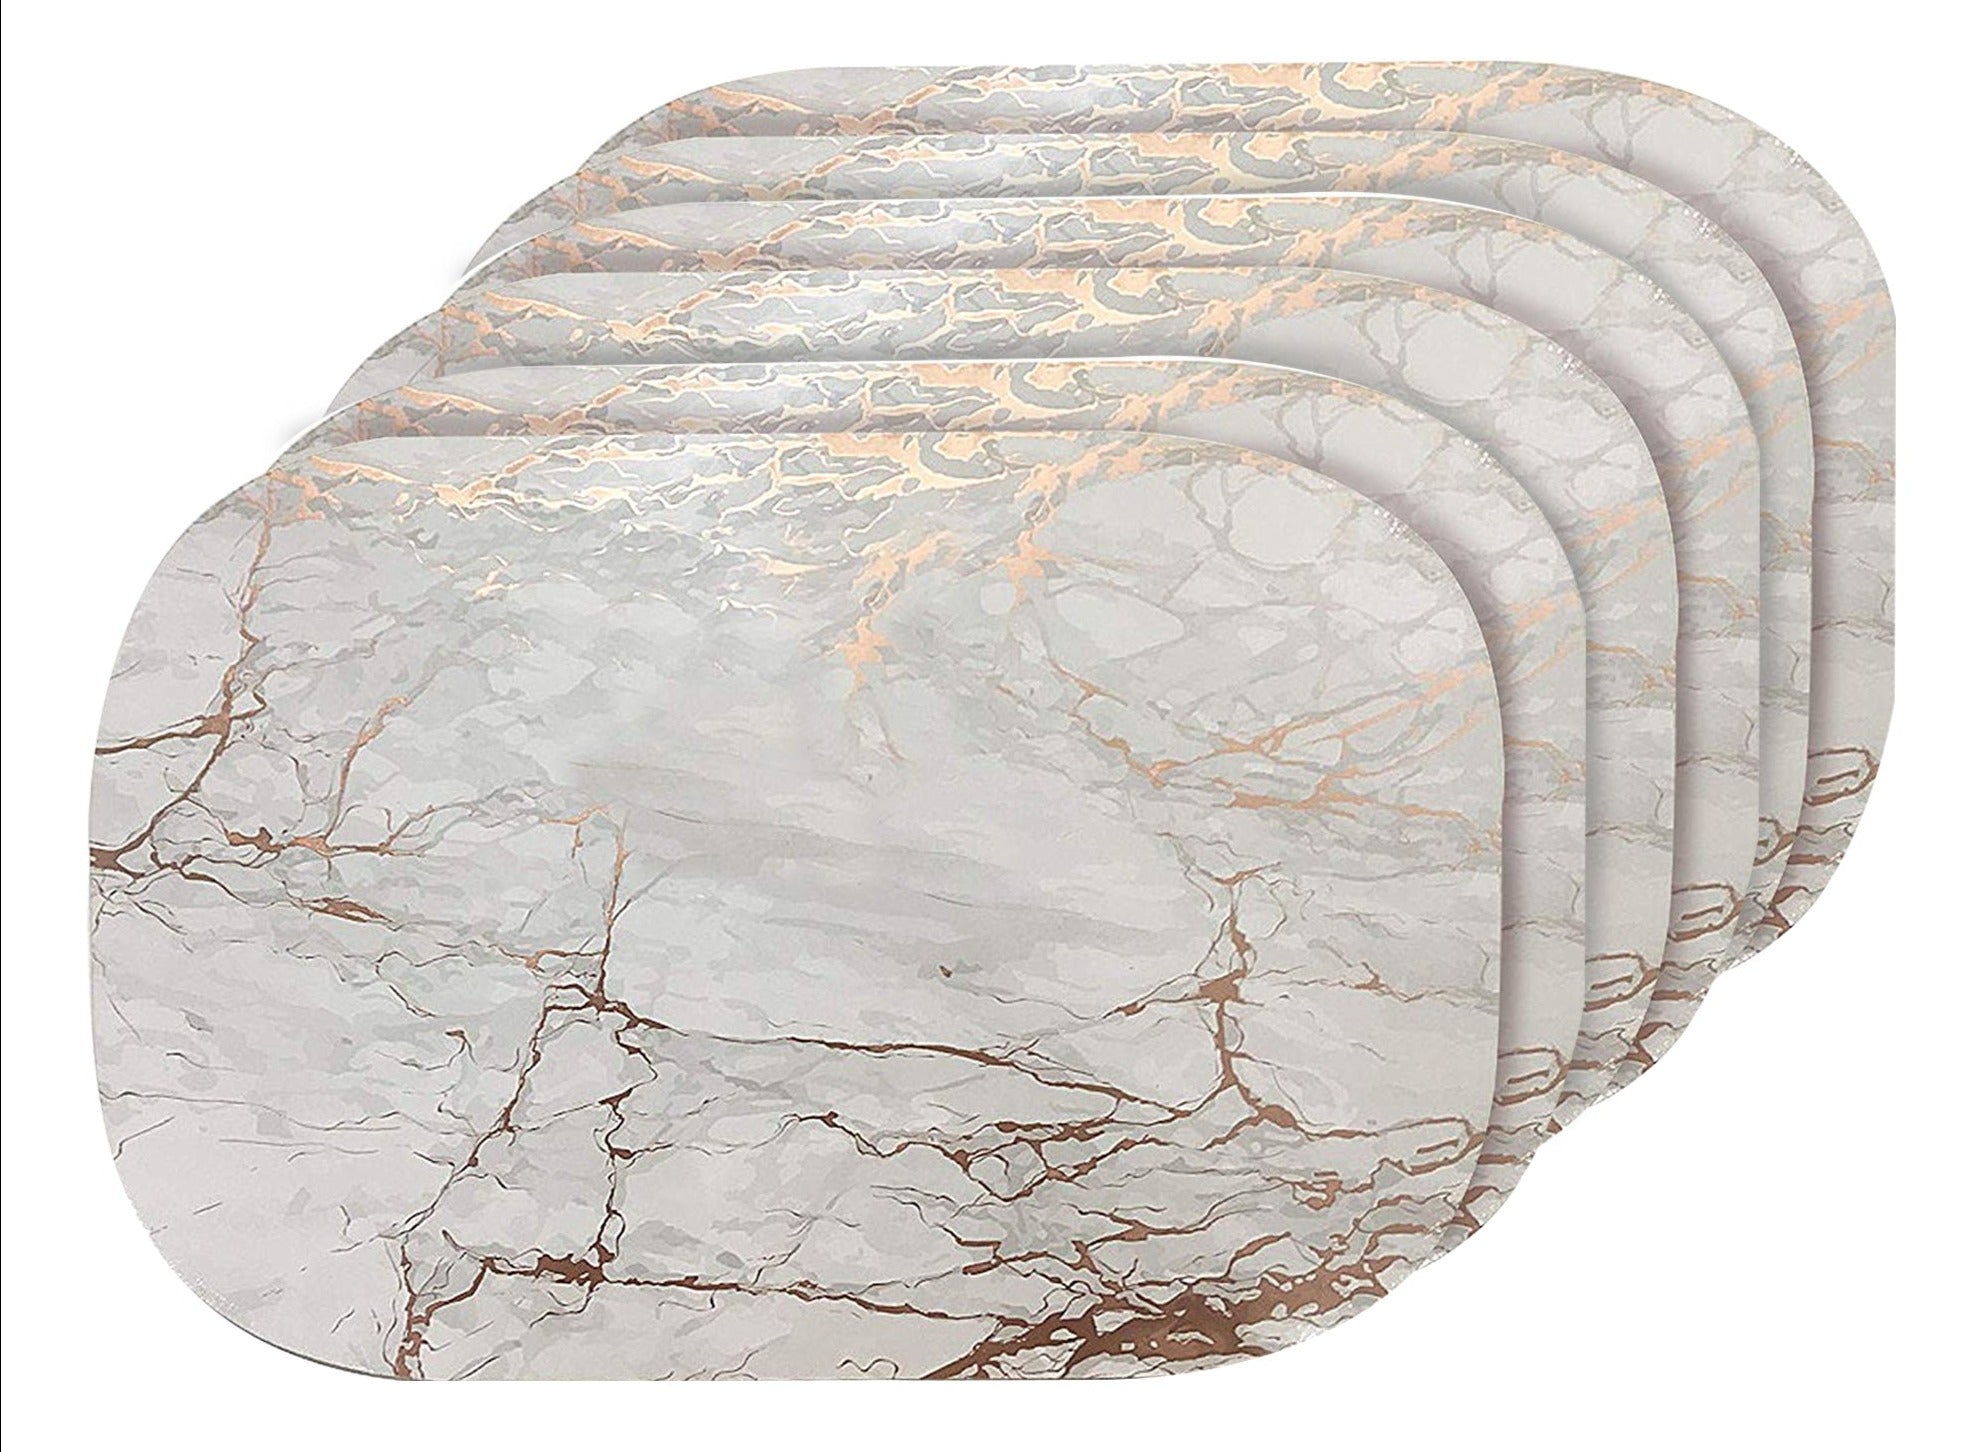 Dainty Home Marble Cork Foil Printed Marble Granite Designed Thick Cork Textured 12" x 18" Oval Placemats